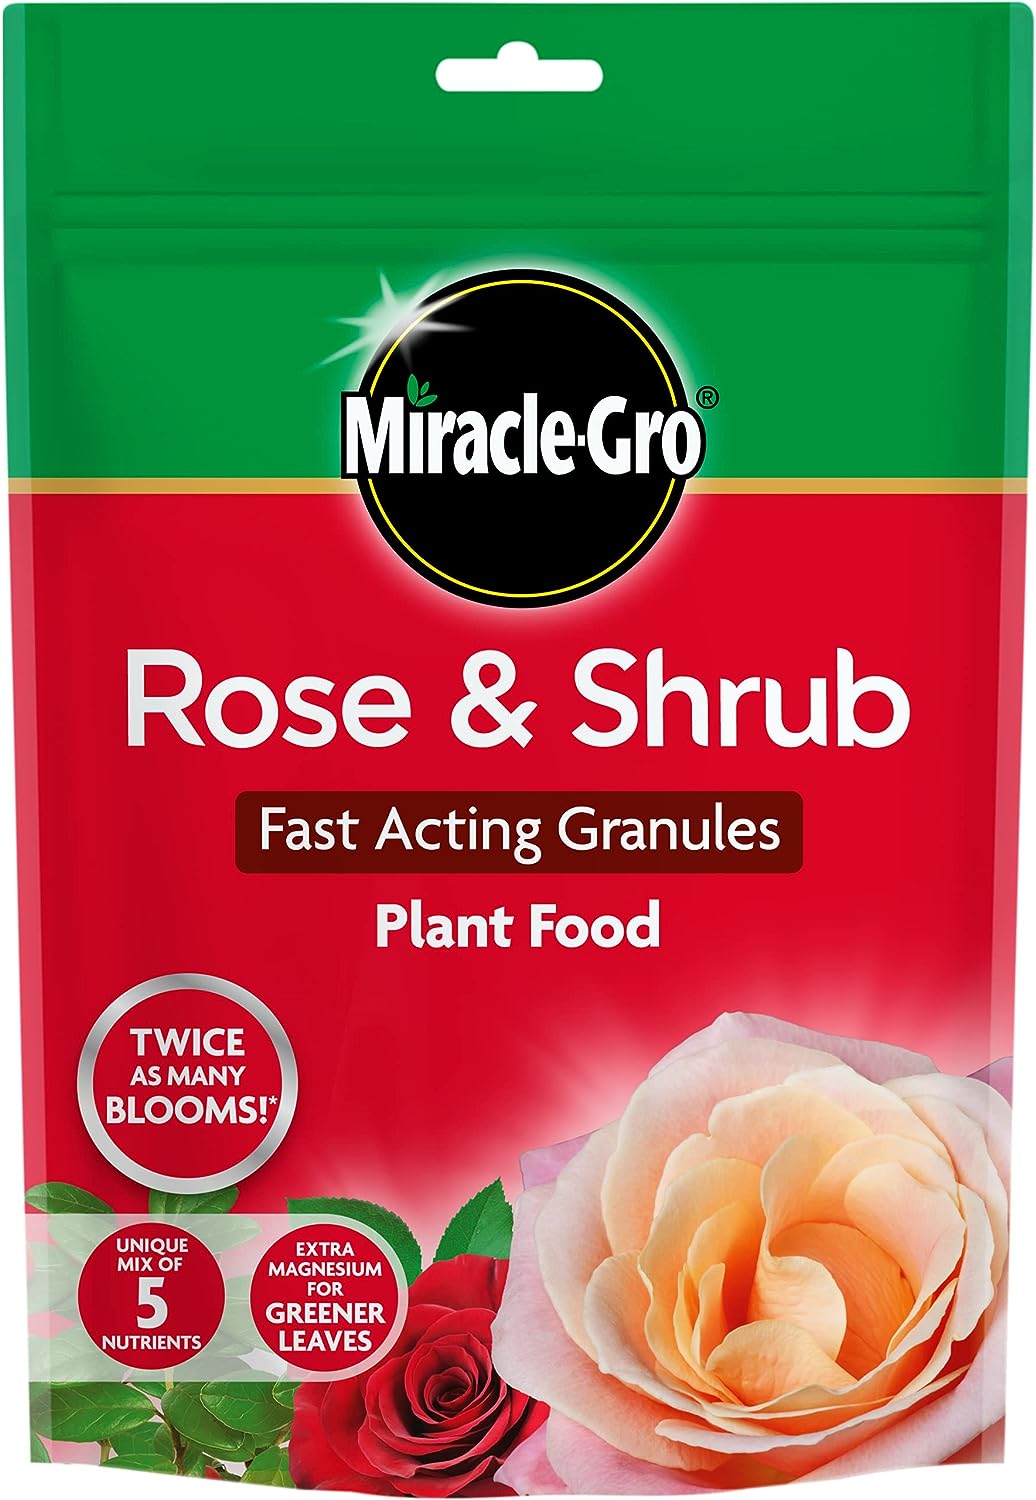 Miracle-Gro Rose & Shrub Fast Acting Granules Plant Food 750g Pouch